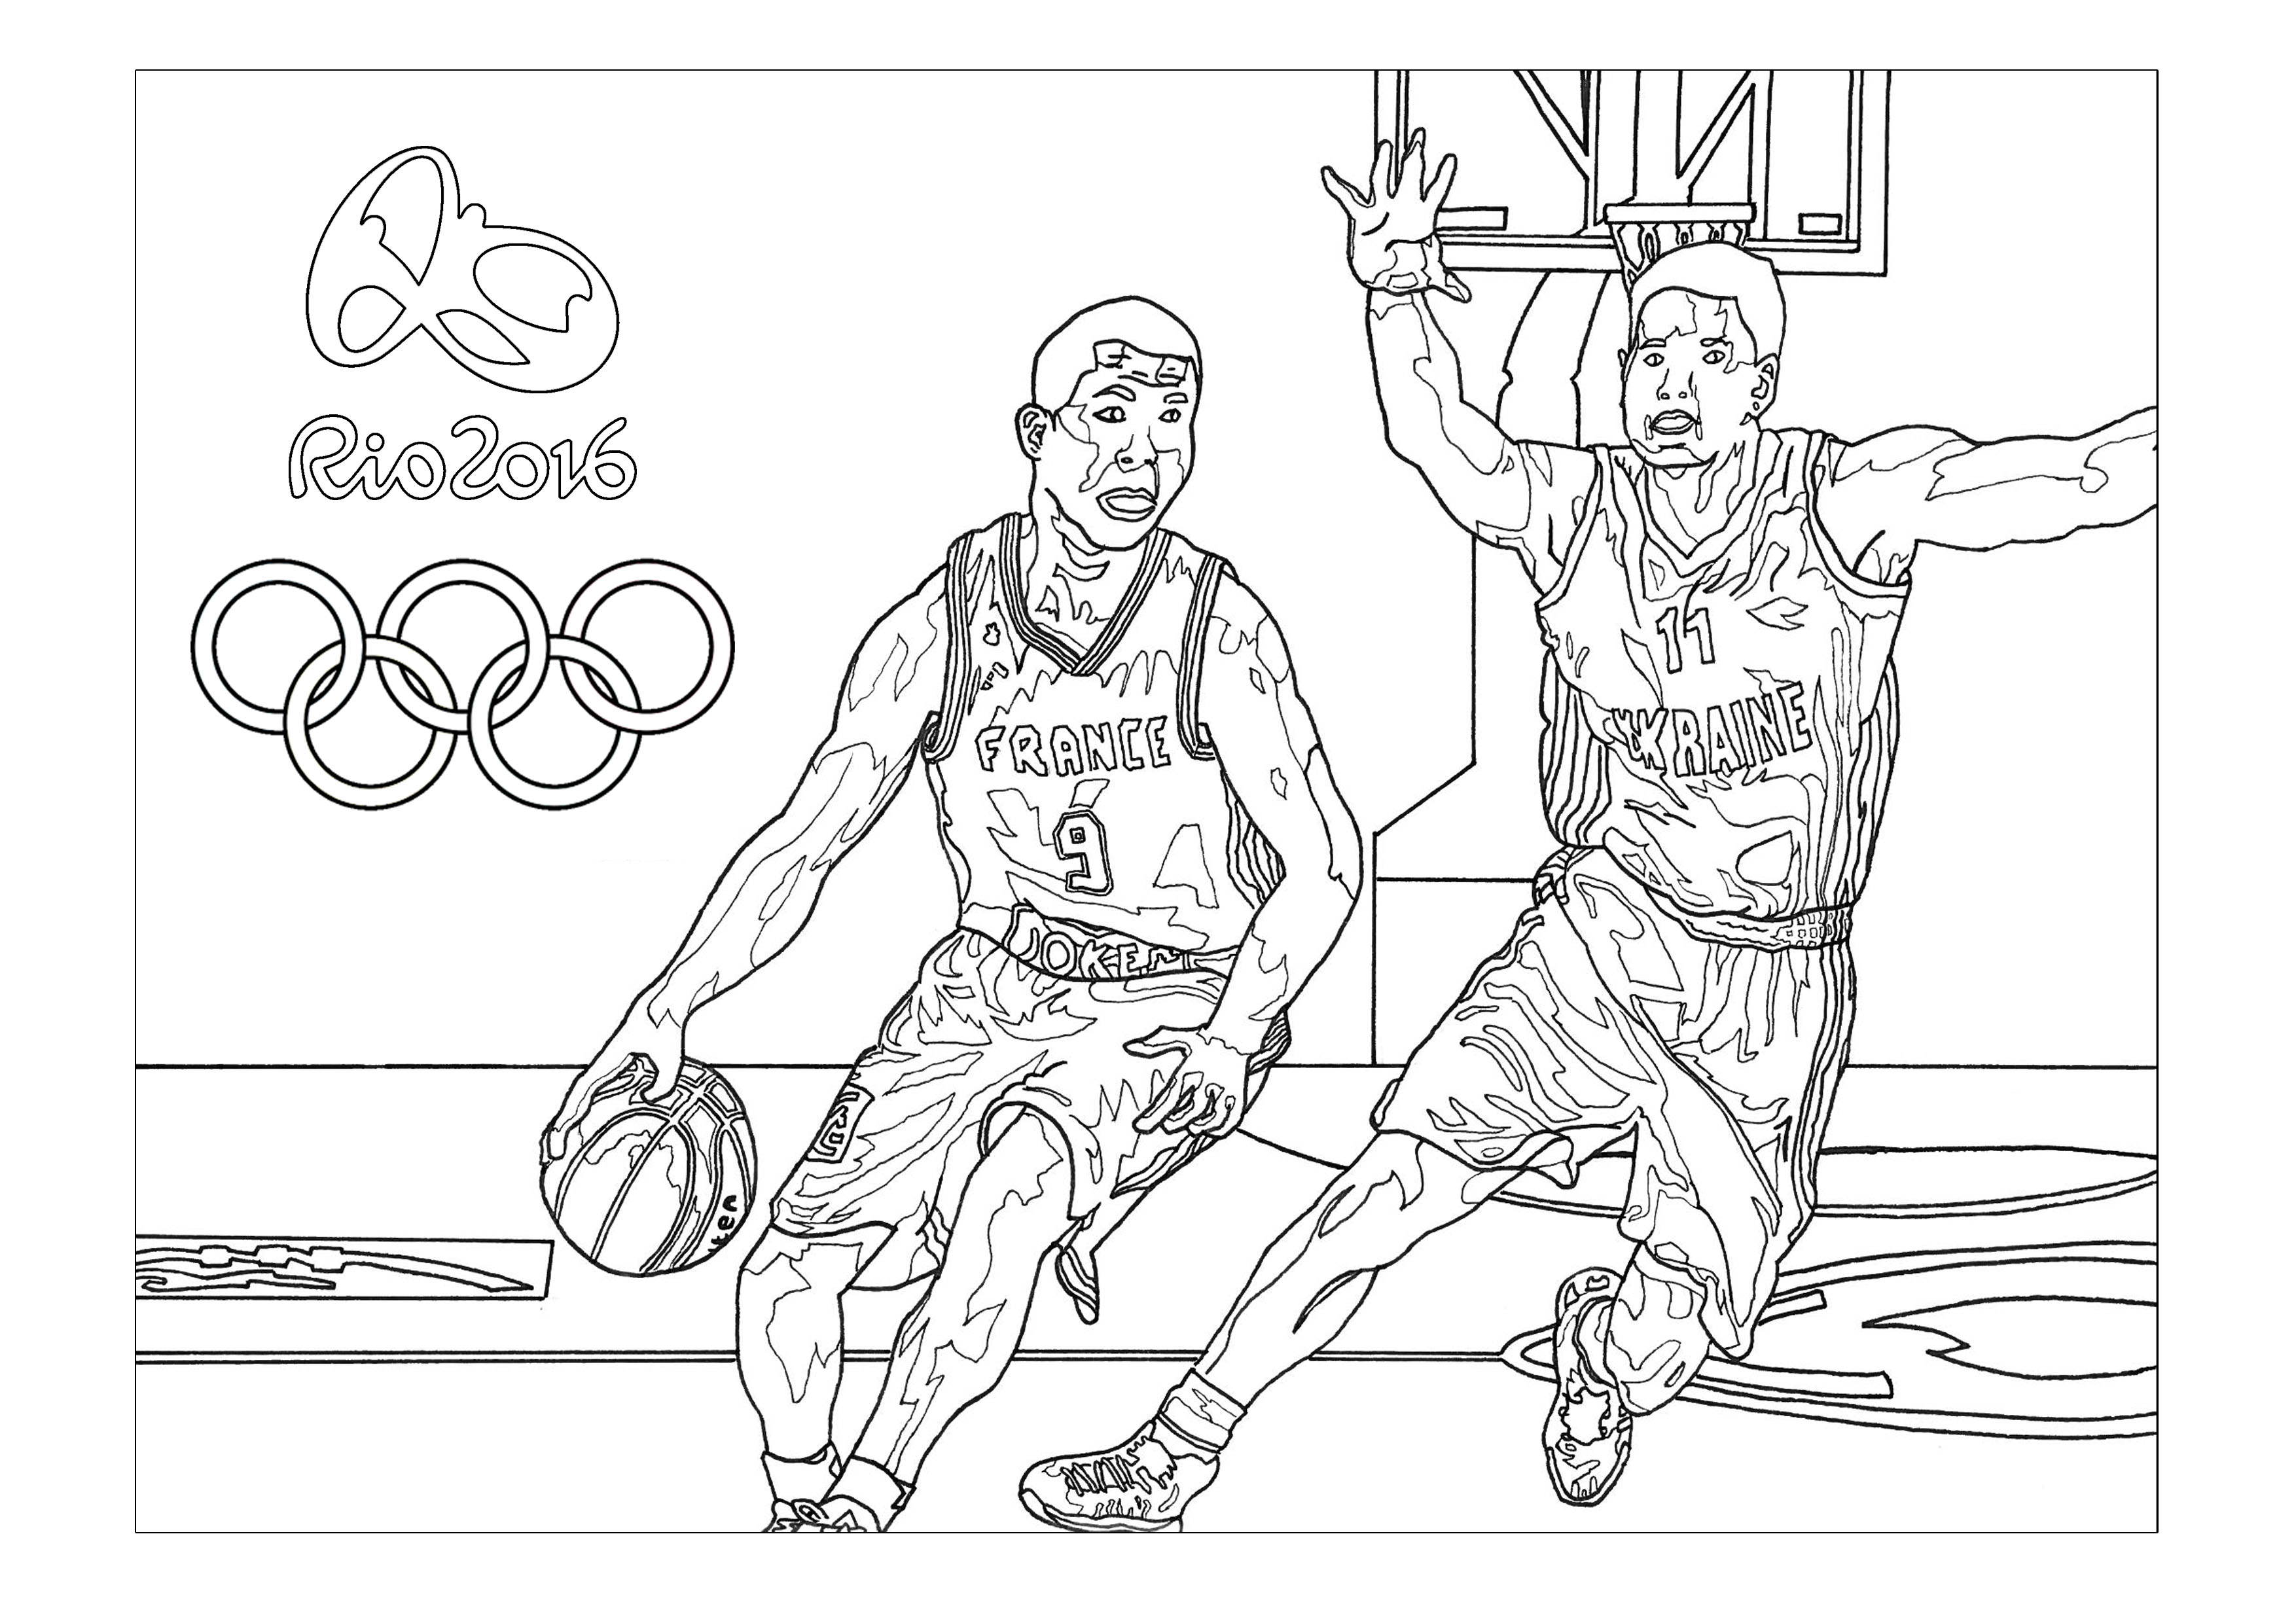 Coloring Olympic Games Rio 2016 : Basketball